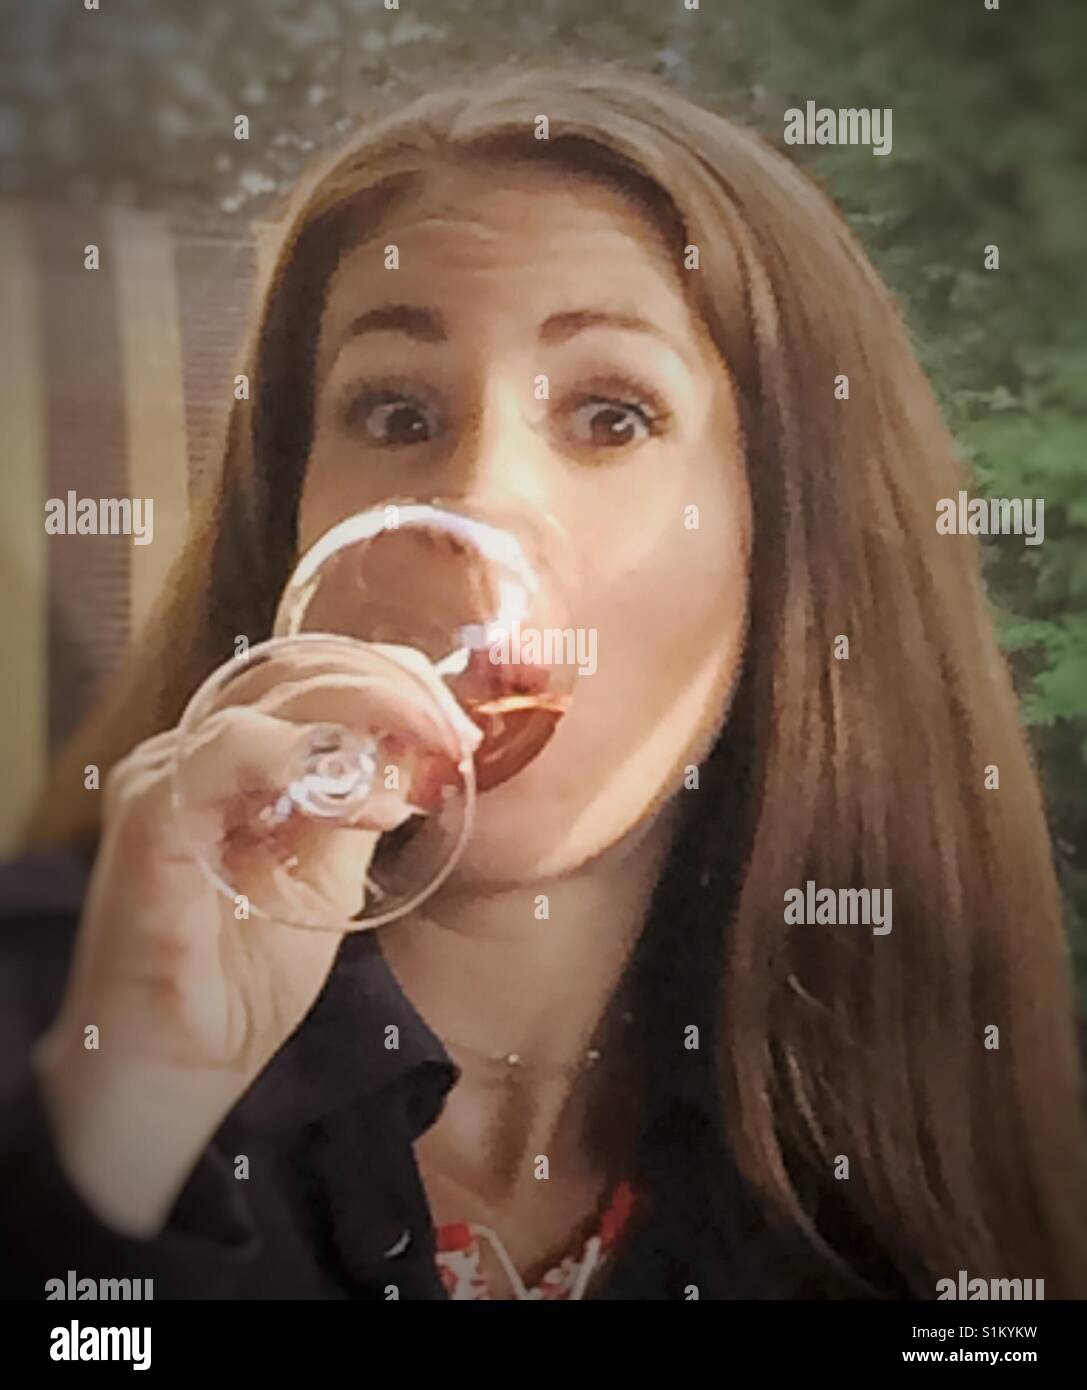 Woman drinking wine on a patio. Stock Photo